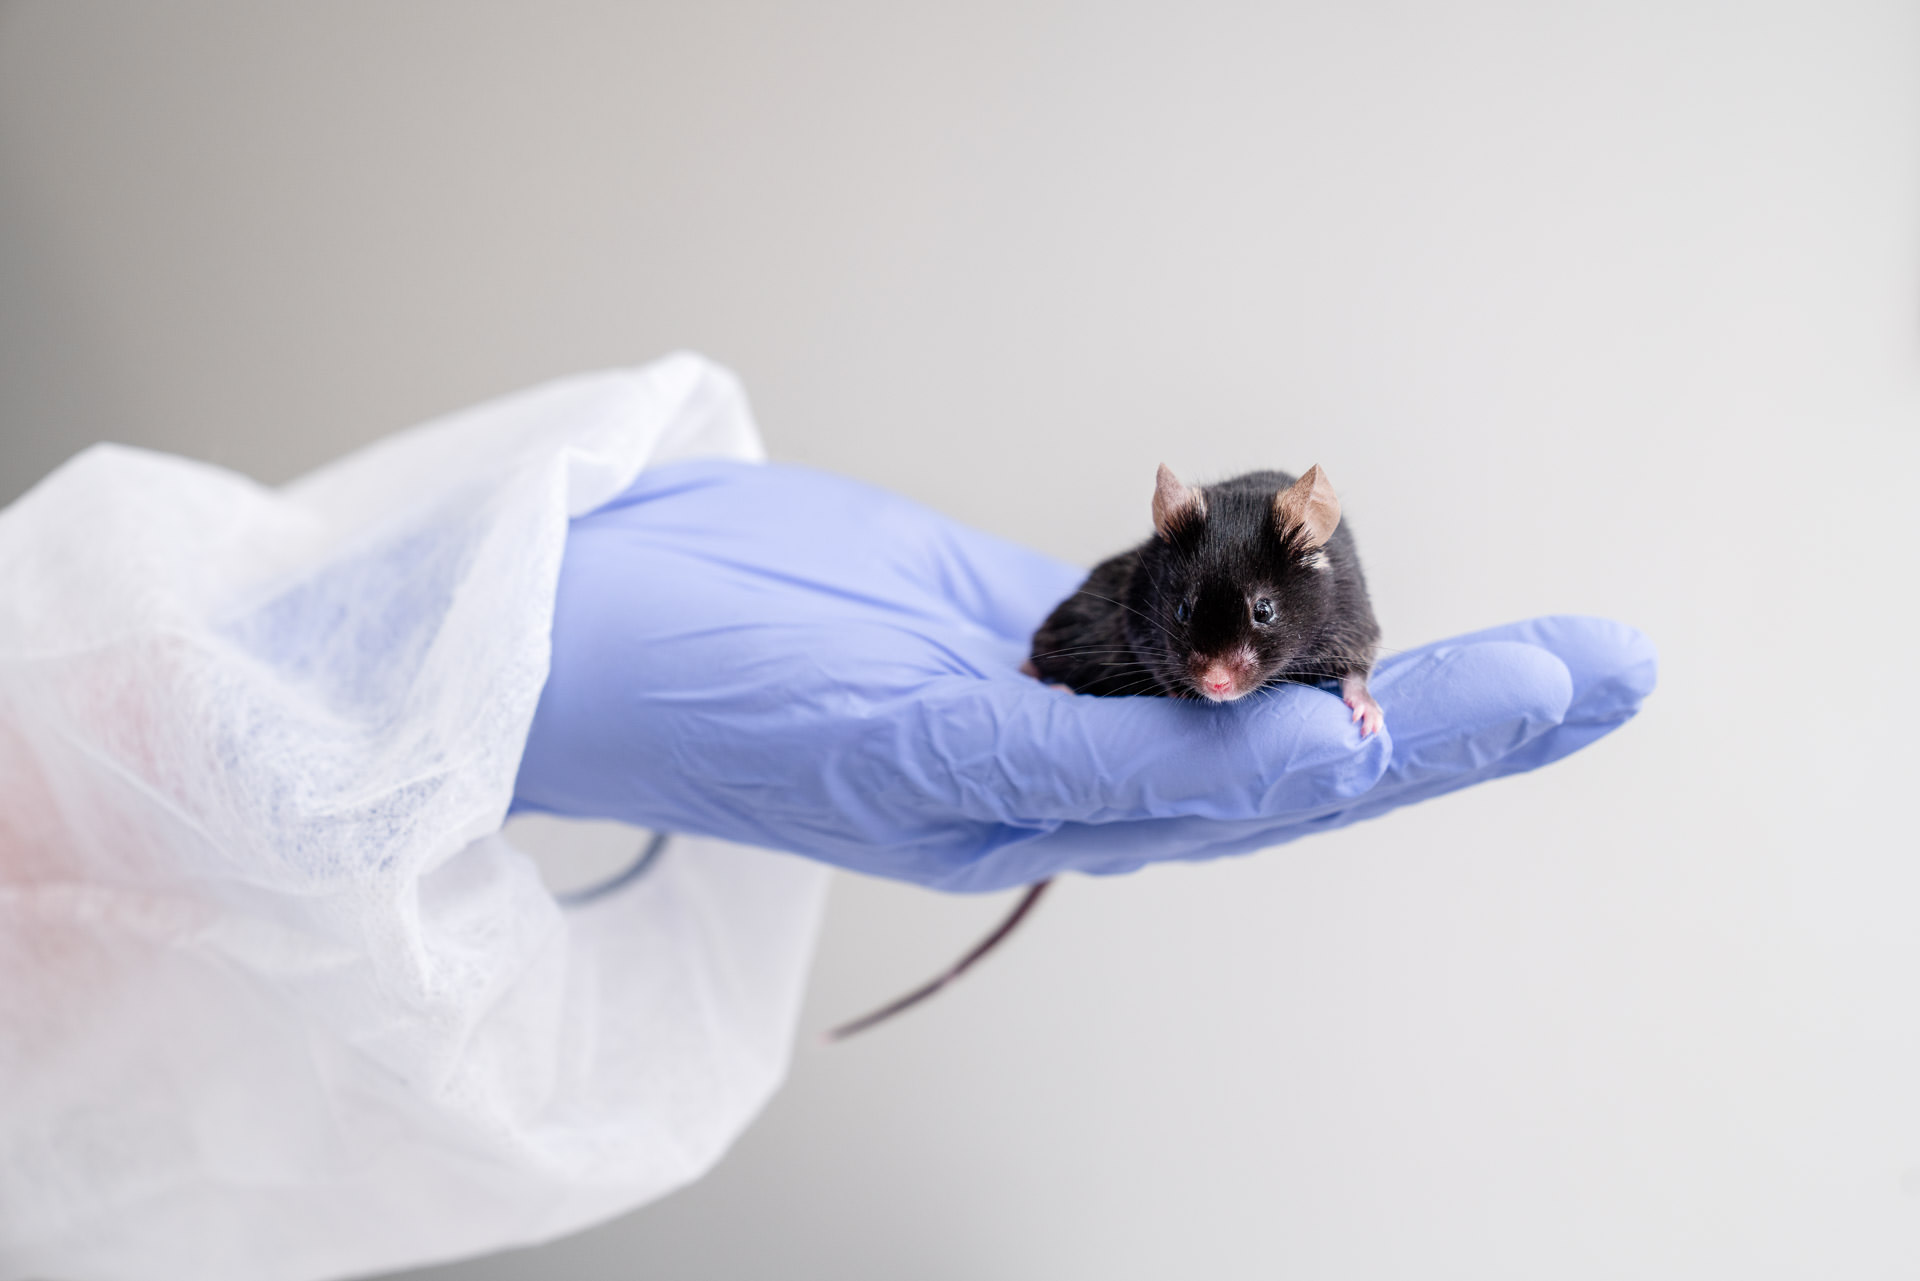 Mouse - Mus musculus on a hand with latex glove. Science photography.